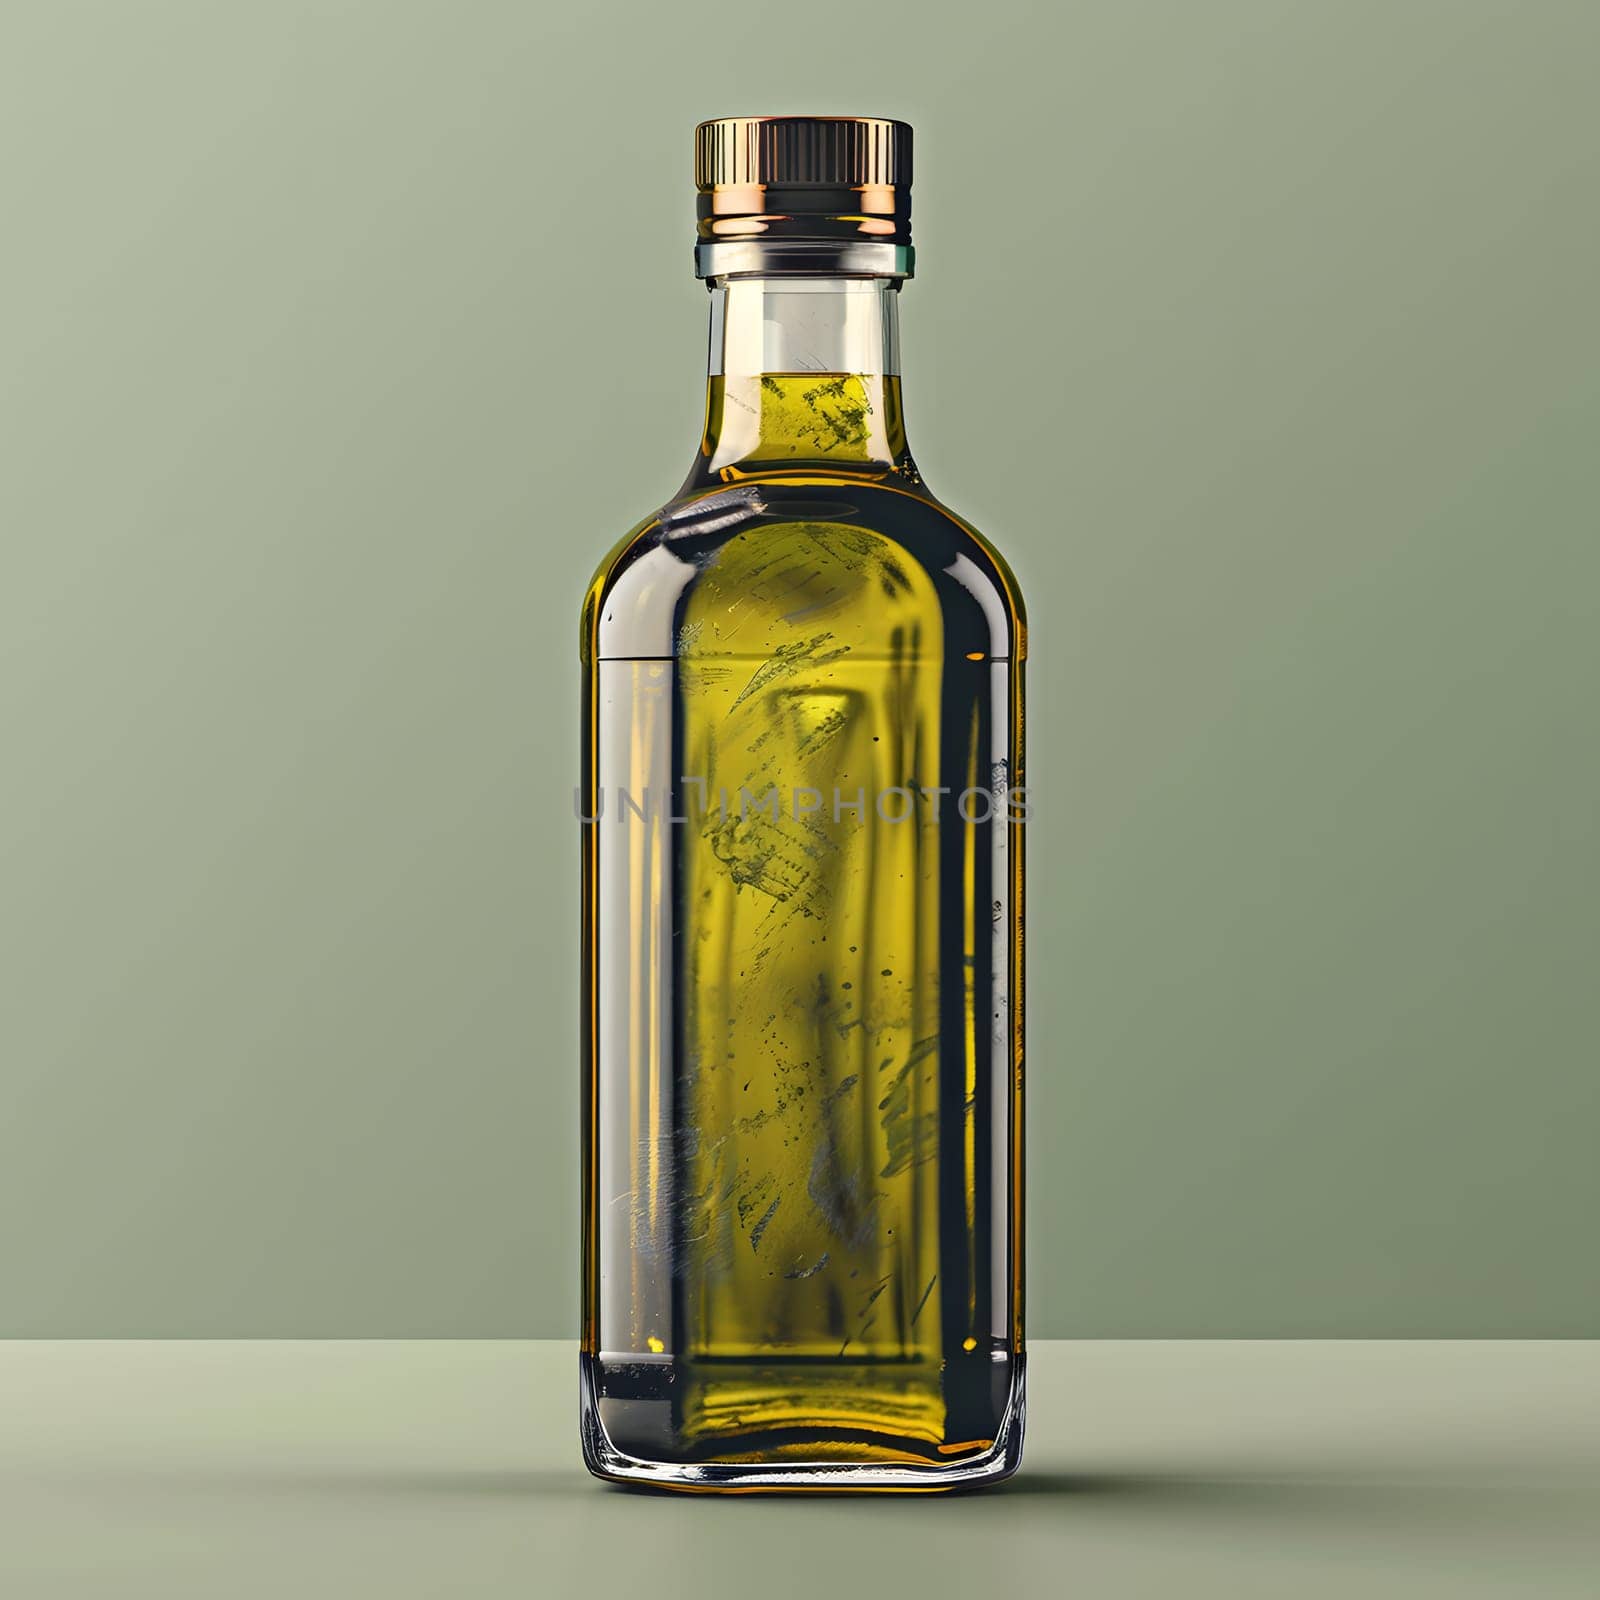 A glass bottle filled with olive oil is placed on a table, showcasing the smooth fluid inside. The bottle is an example of drinkware that contains a solvent solution